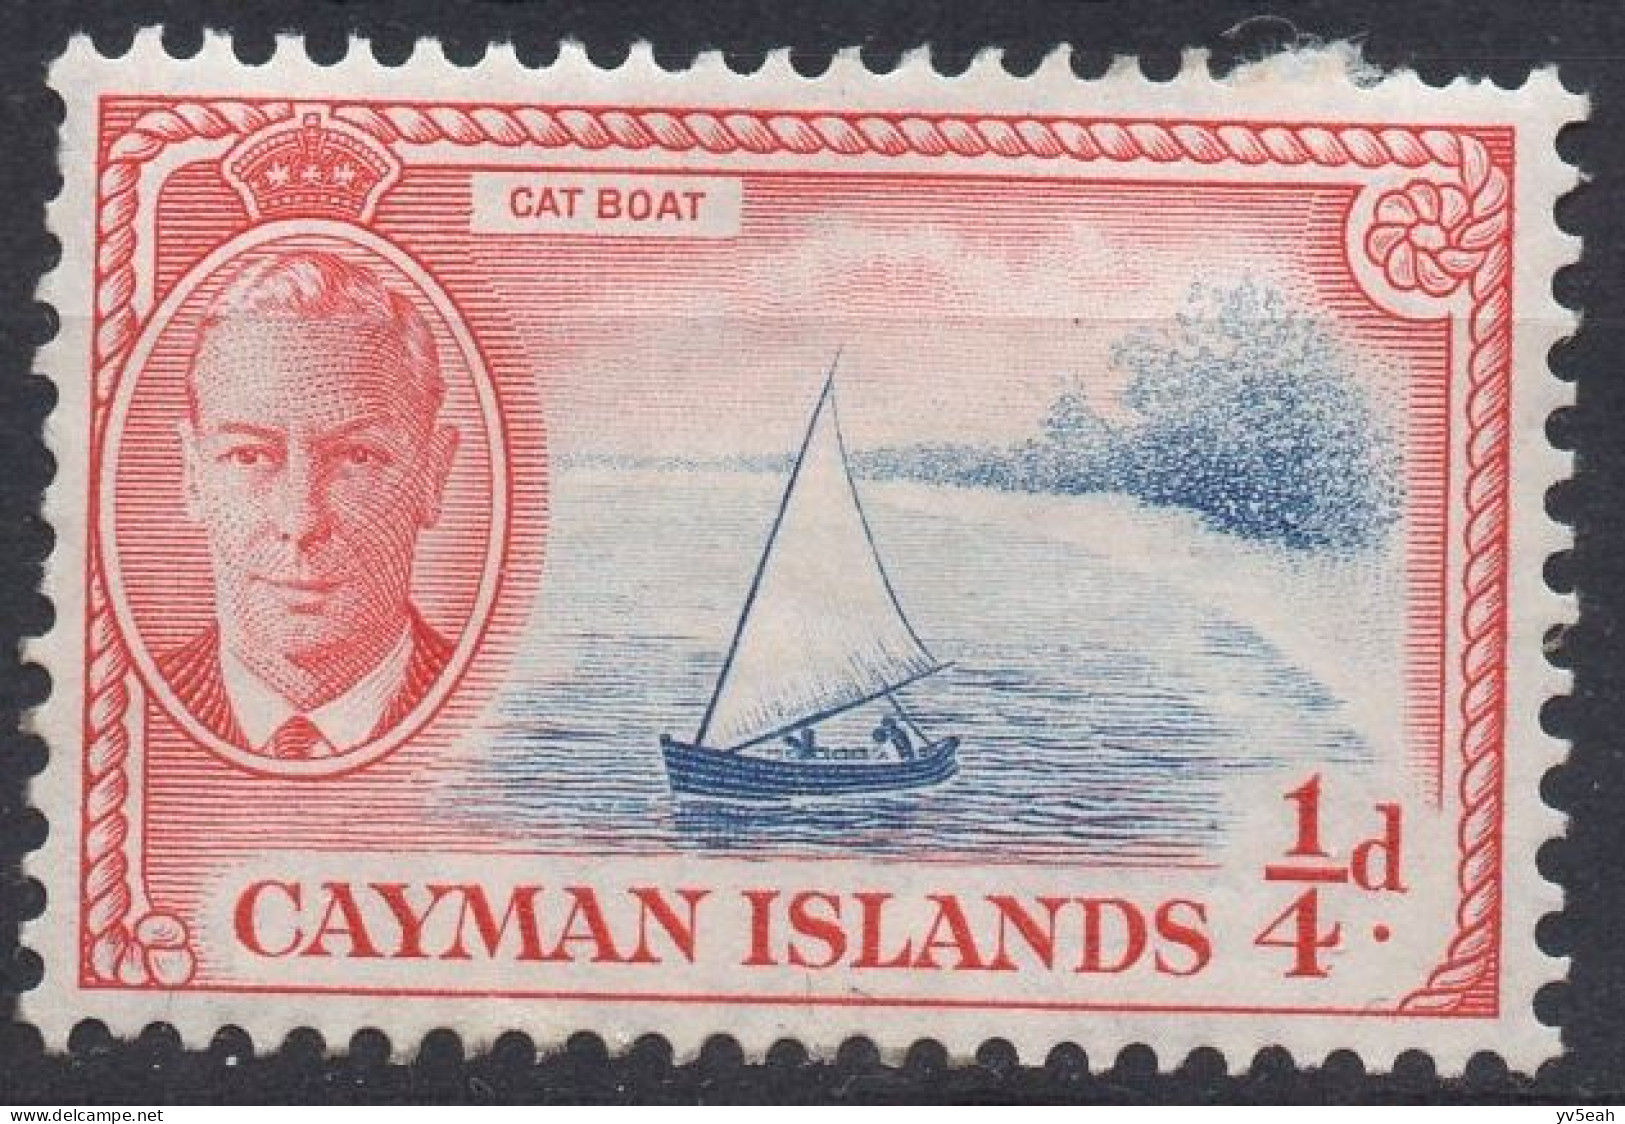 CAYMAN ISLAND/1950/MH/SC#122/KING GEORGE VI / KGVI / CATBOAT/ 1/4p ROSE RED & BLUE - Cayman (Isole)